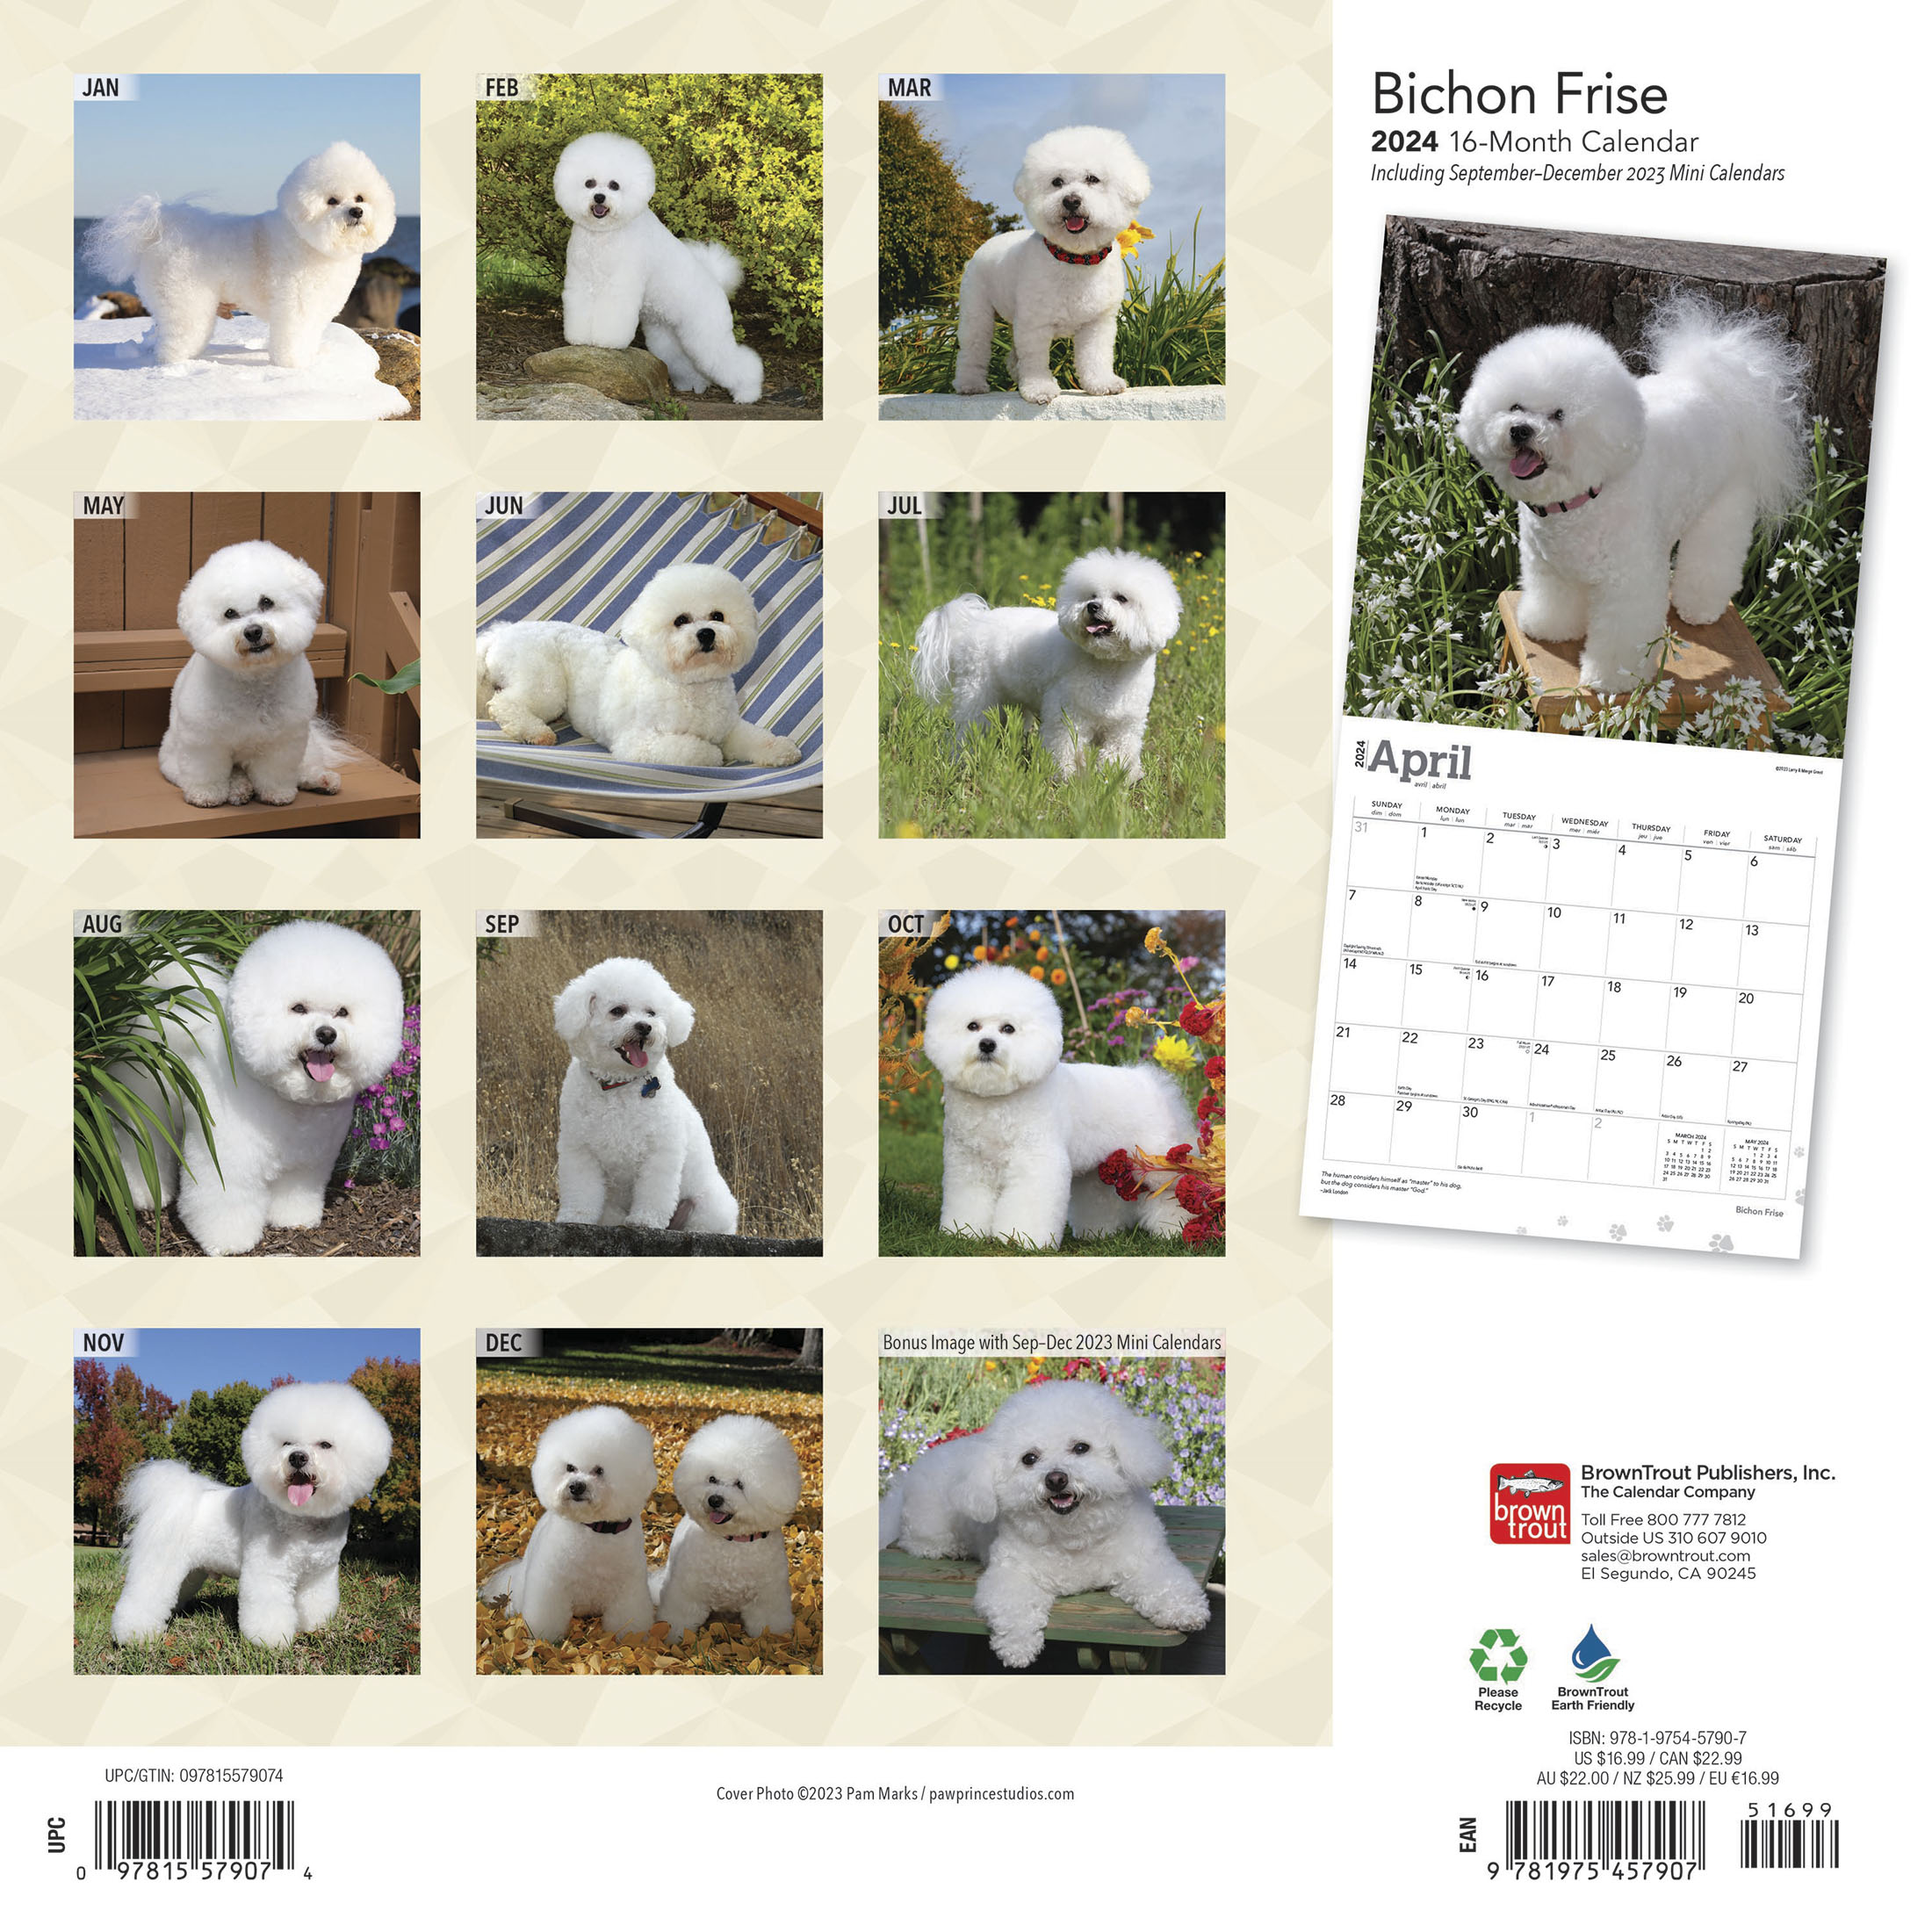 Bichon Frise | 2024 12x24" (Hanging) Square Wall Calendar | BrownTrout - image 2 of 8